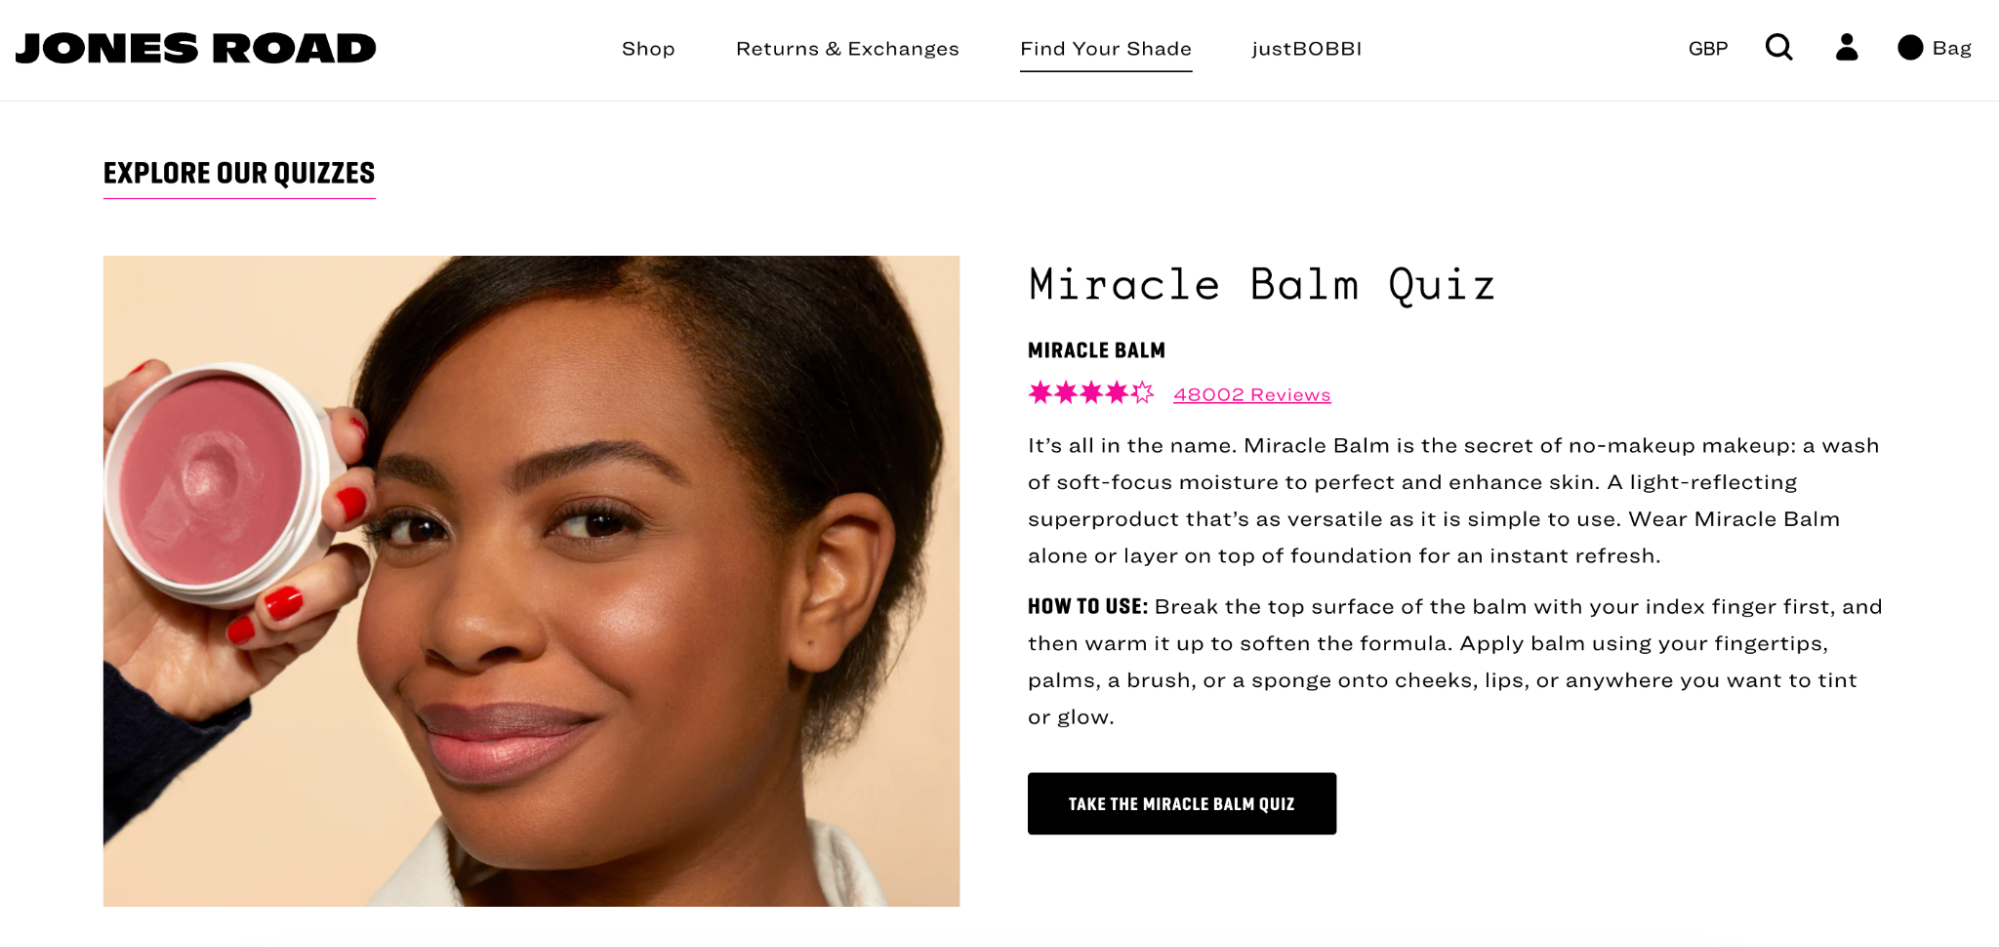 Quiz landing page for Jones Road Beauty’s miracle balm with a call-to-action button.